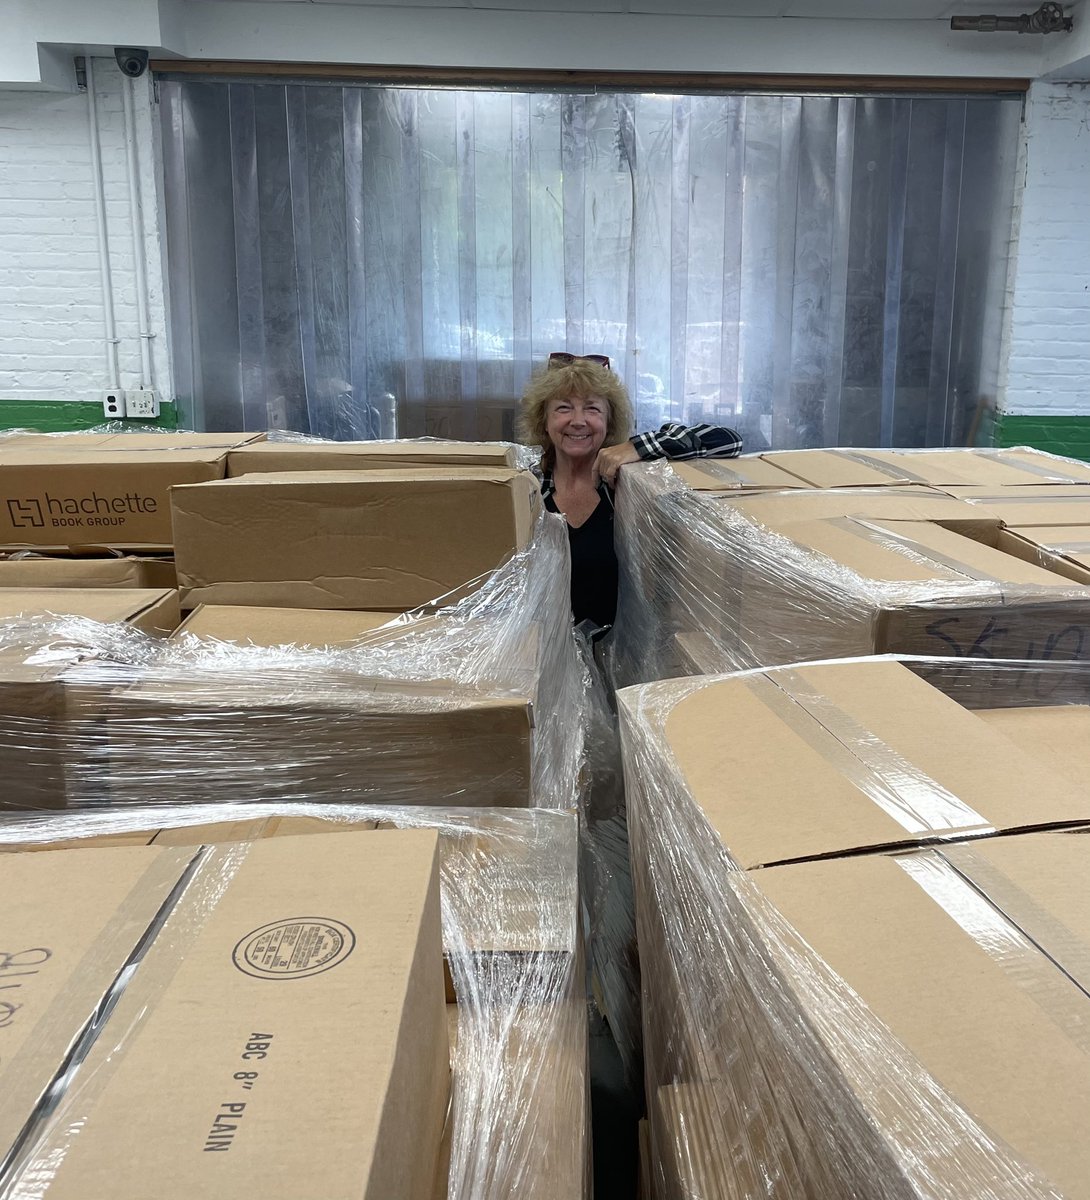 Our 40,000 books have arrived! Join us for free books on Oct. 1!  Volunteers still needed beforehand! #ReadingOpenstheWorld @AFTunion @mspetter @nysut @emiljanaulaj @rweingarten @AFTEVPDeJesus @MelindaJPerson @AndyPallotta @YonkersSchools @CityofYonkers